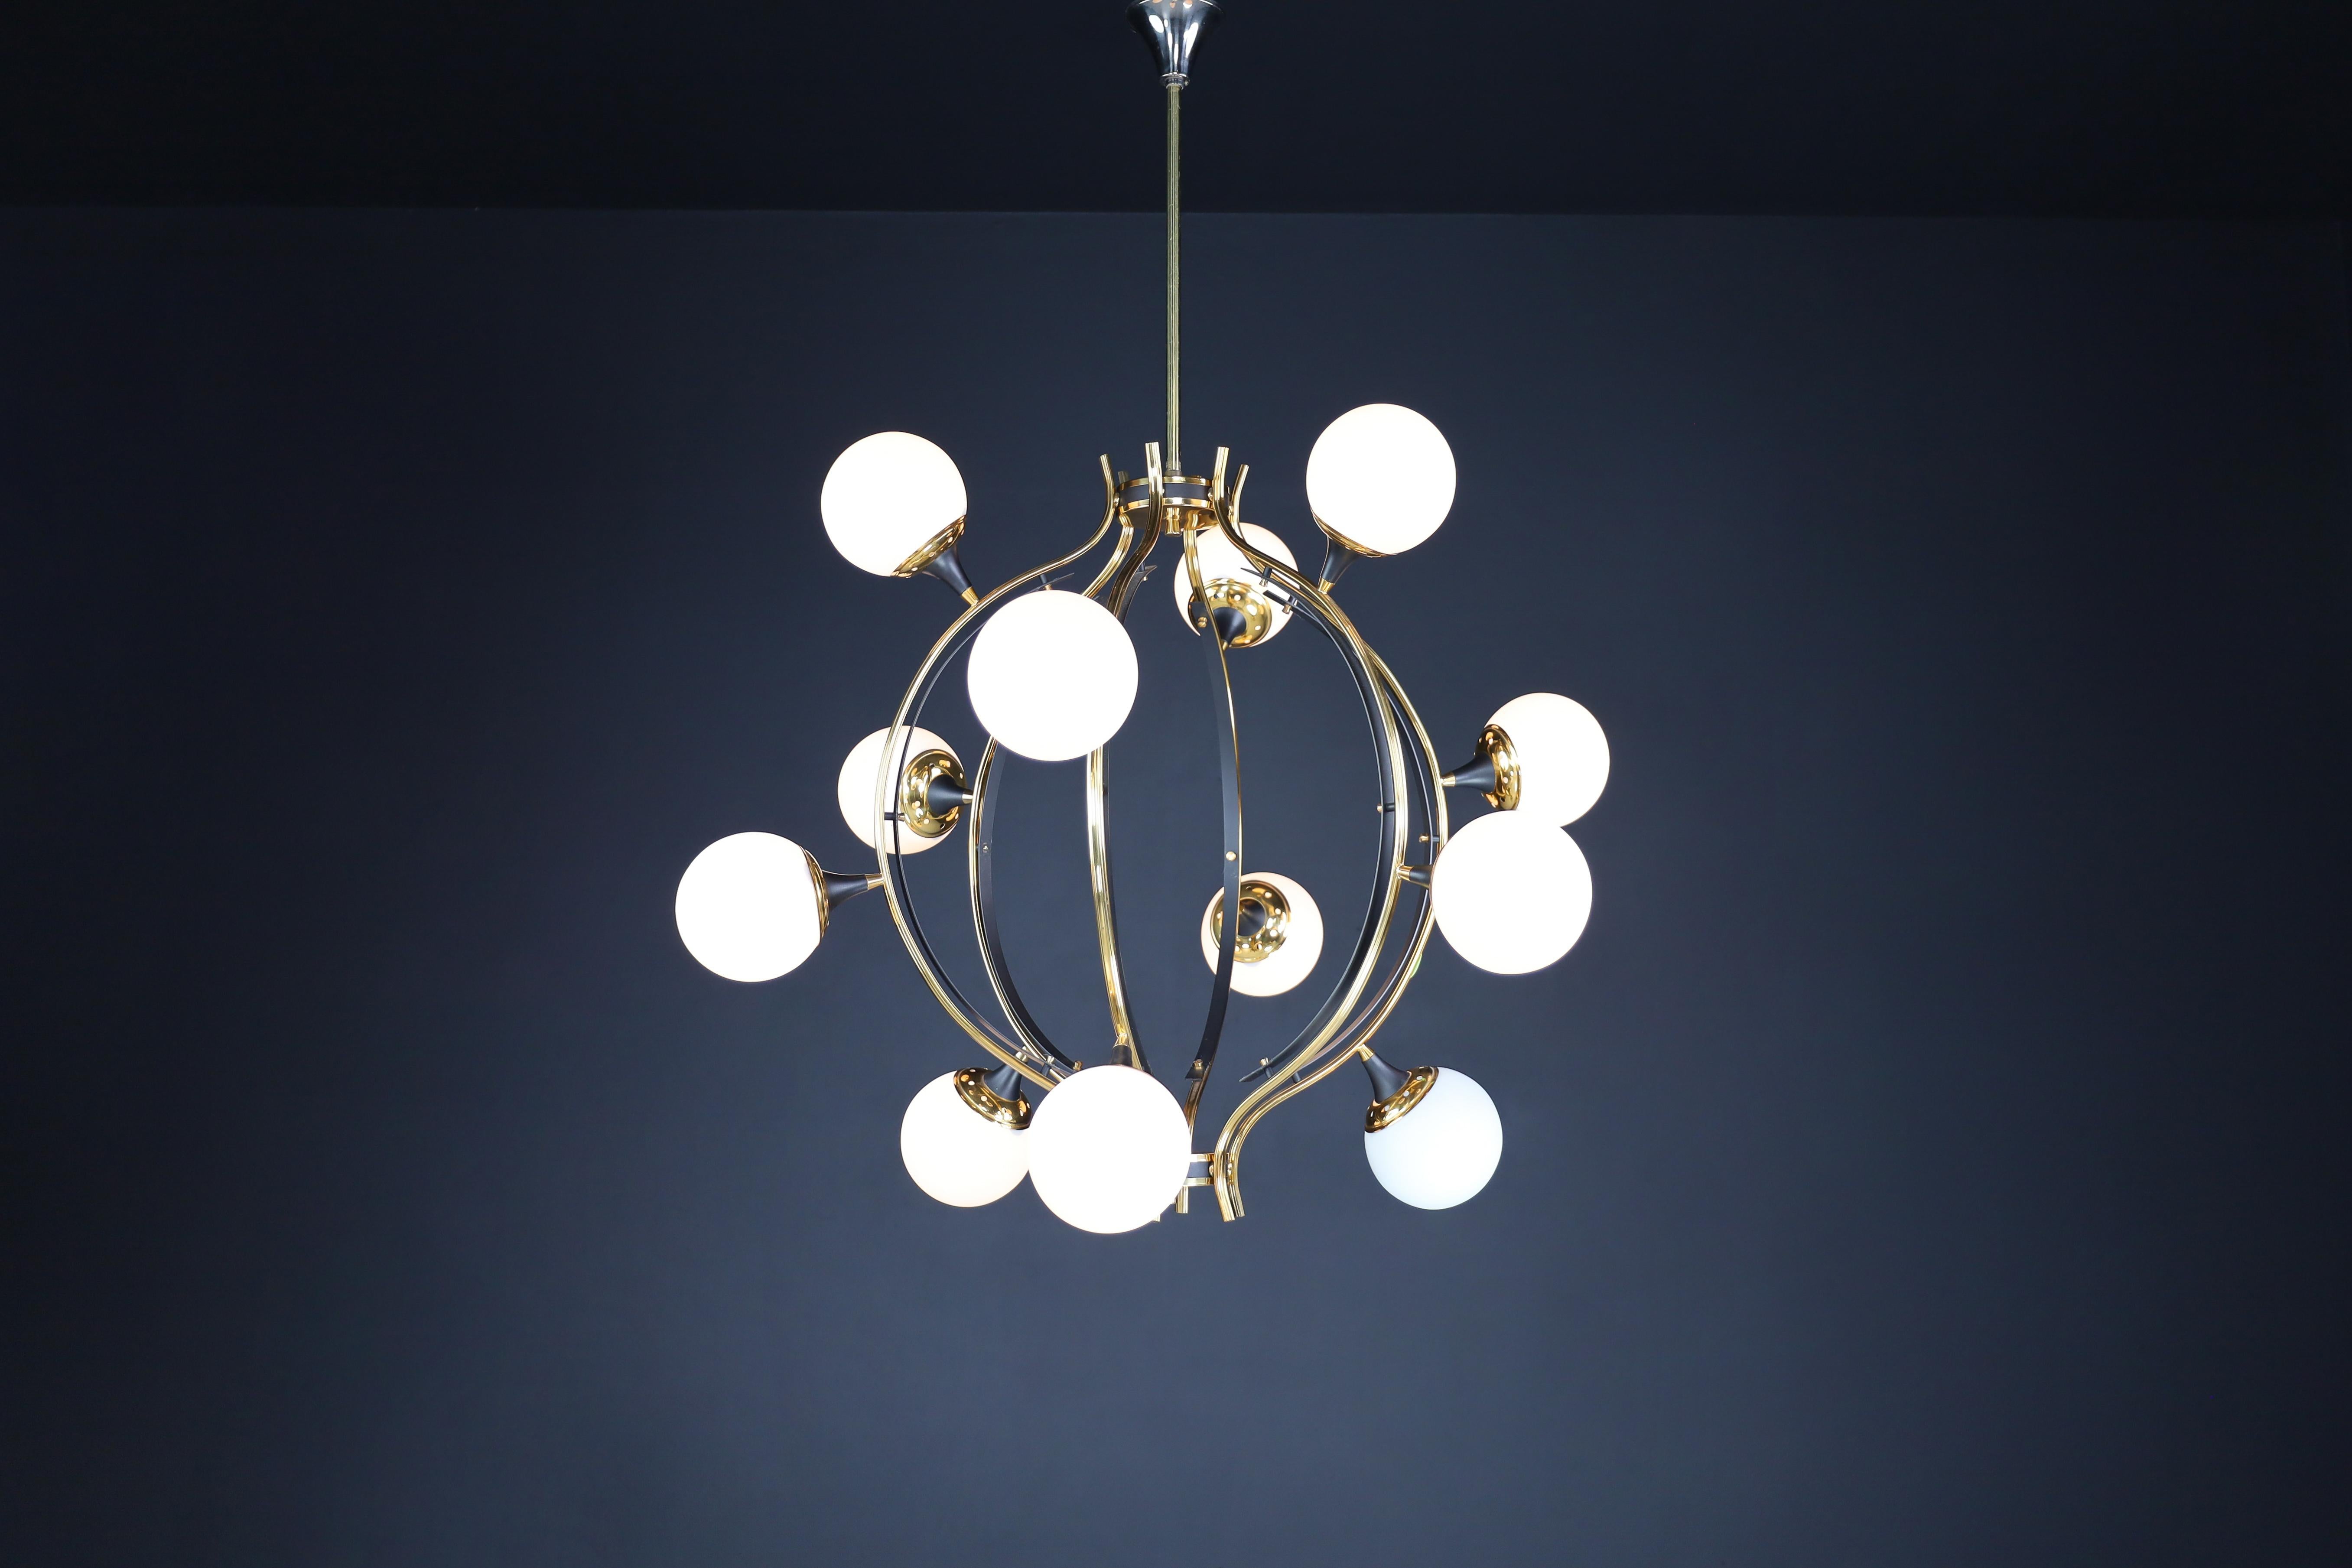 Midcentury Stilnovo Chandelier in Brass and 12 Opaline Globes, Italy 1950s For Sale 6